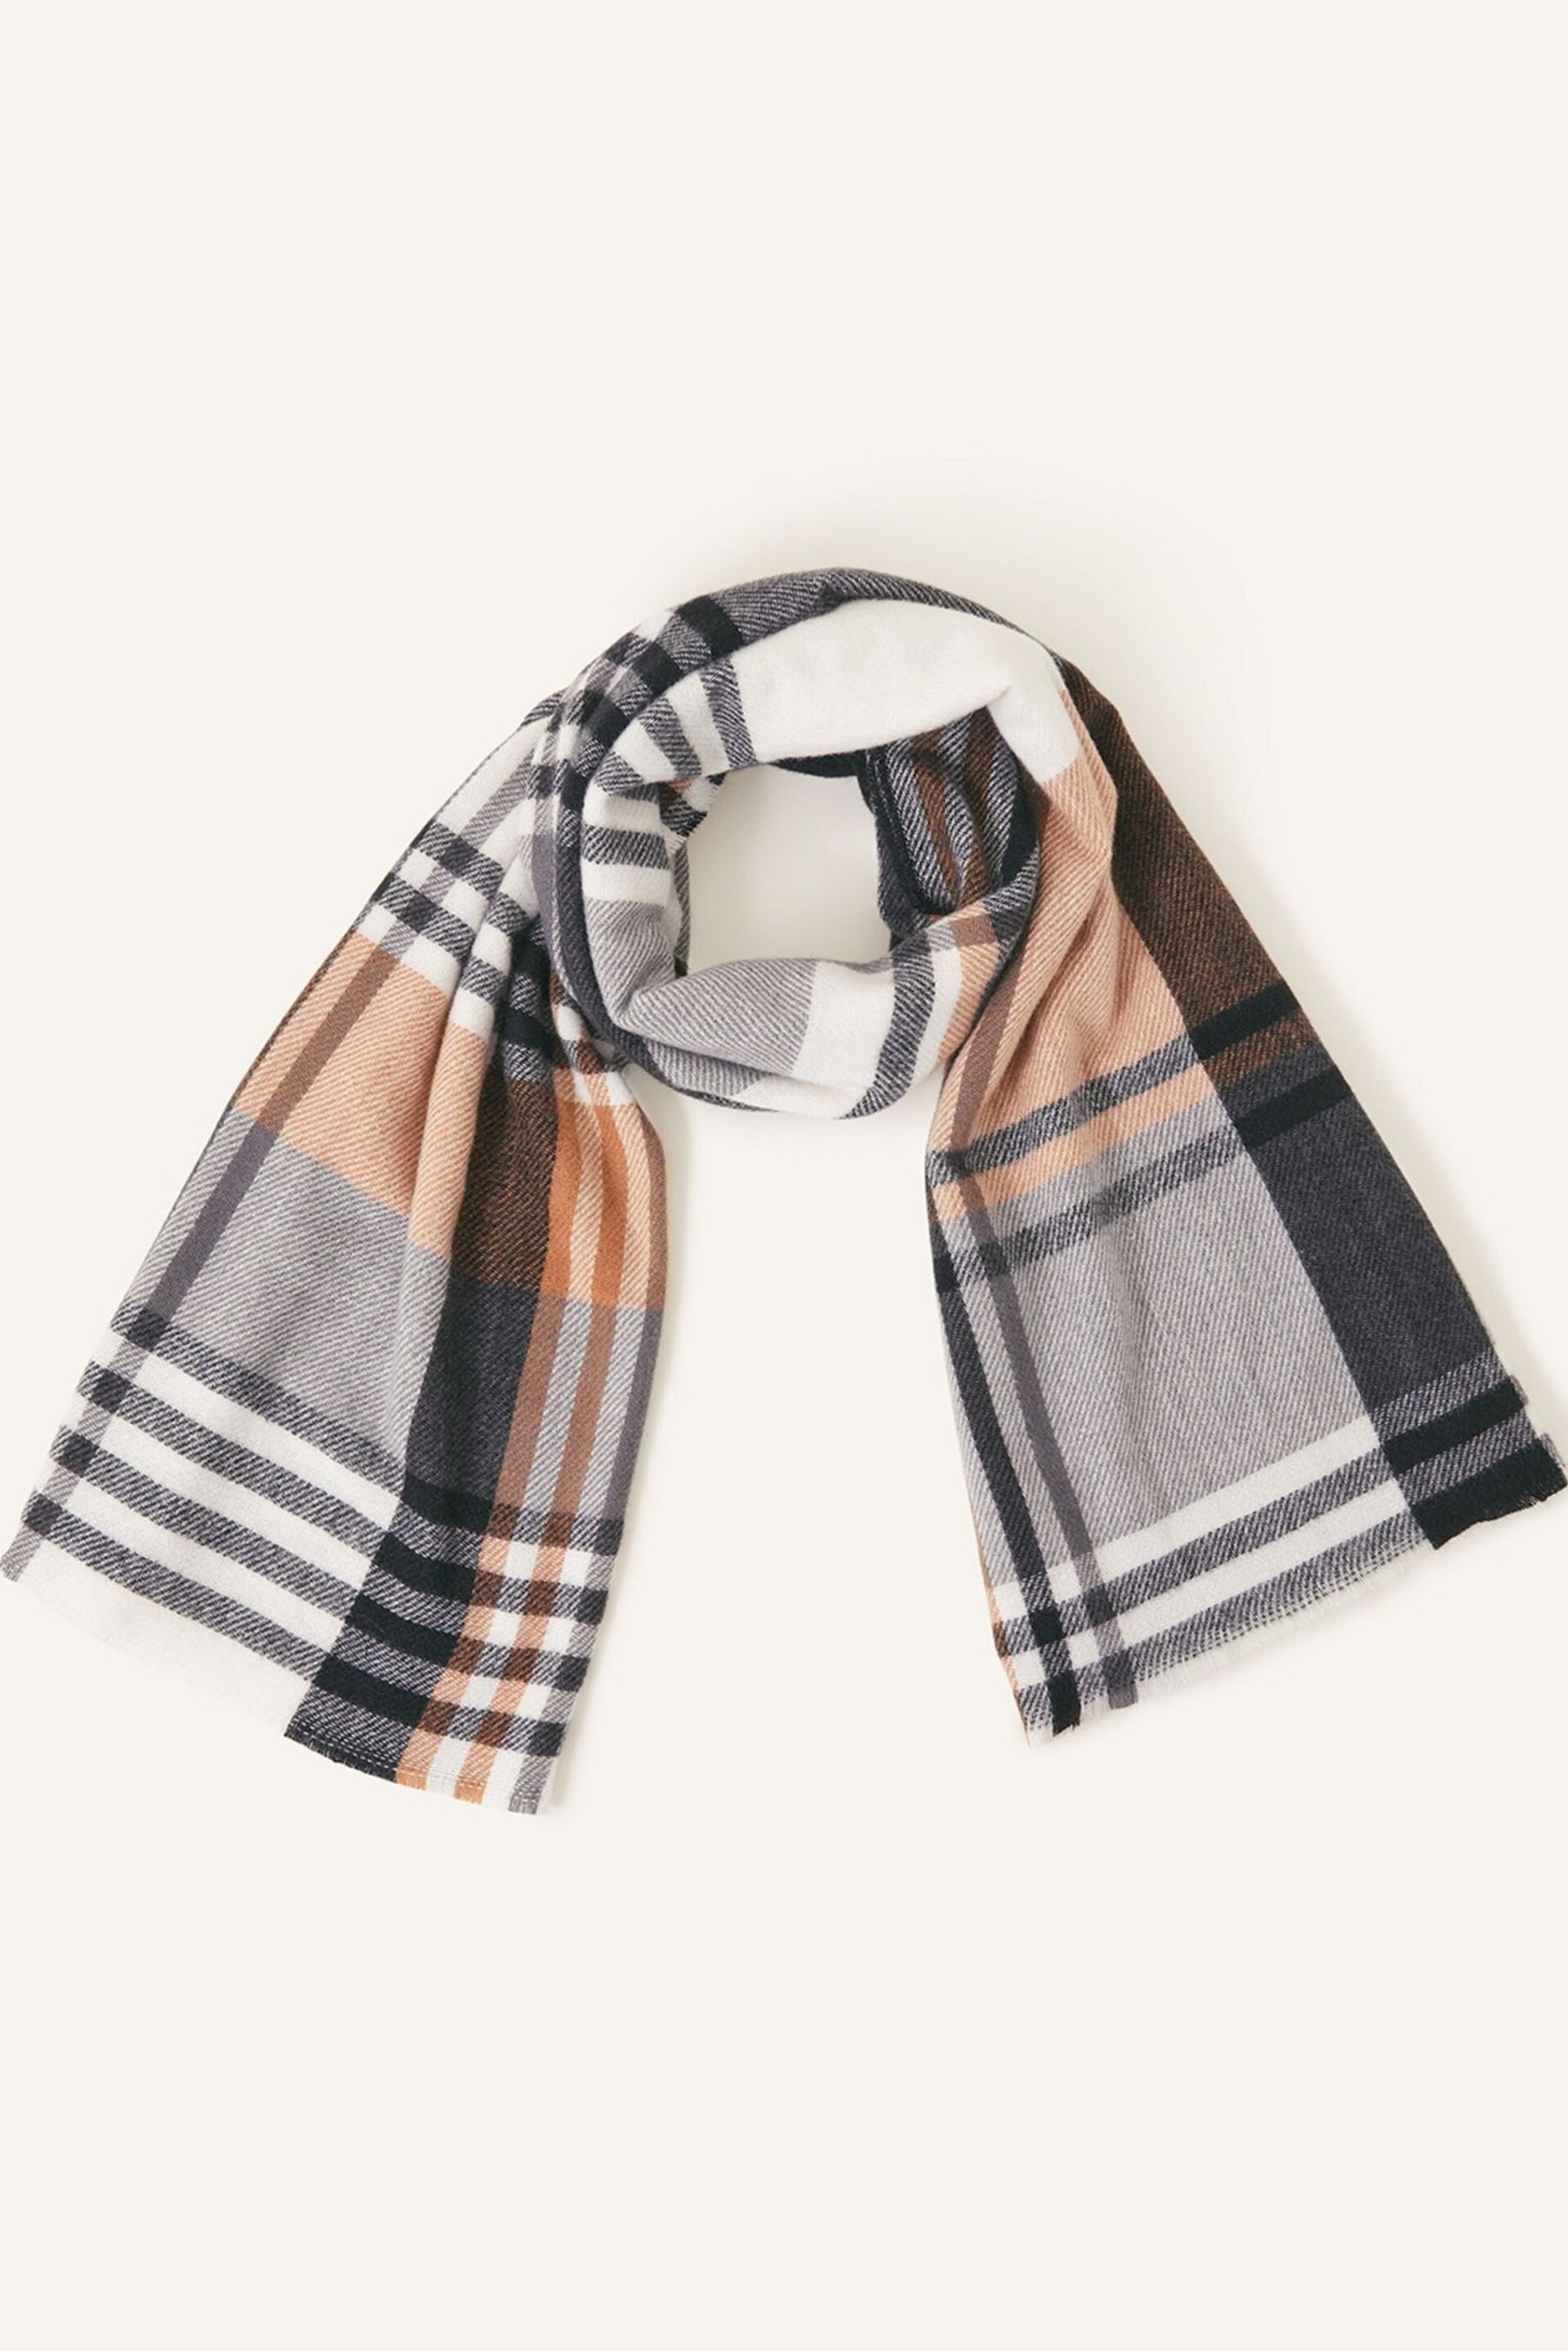 Accessorize Black Check Blanket Scarf - Image 1 of 3